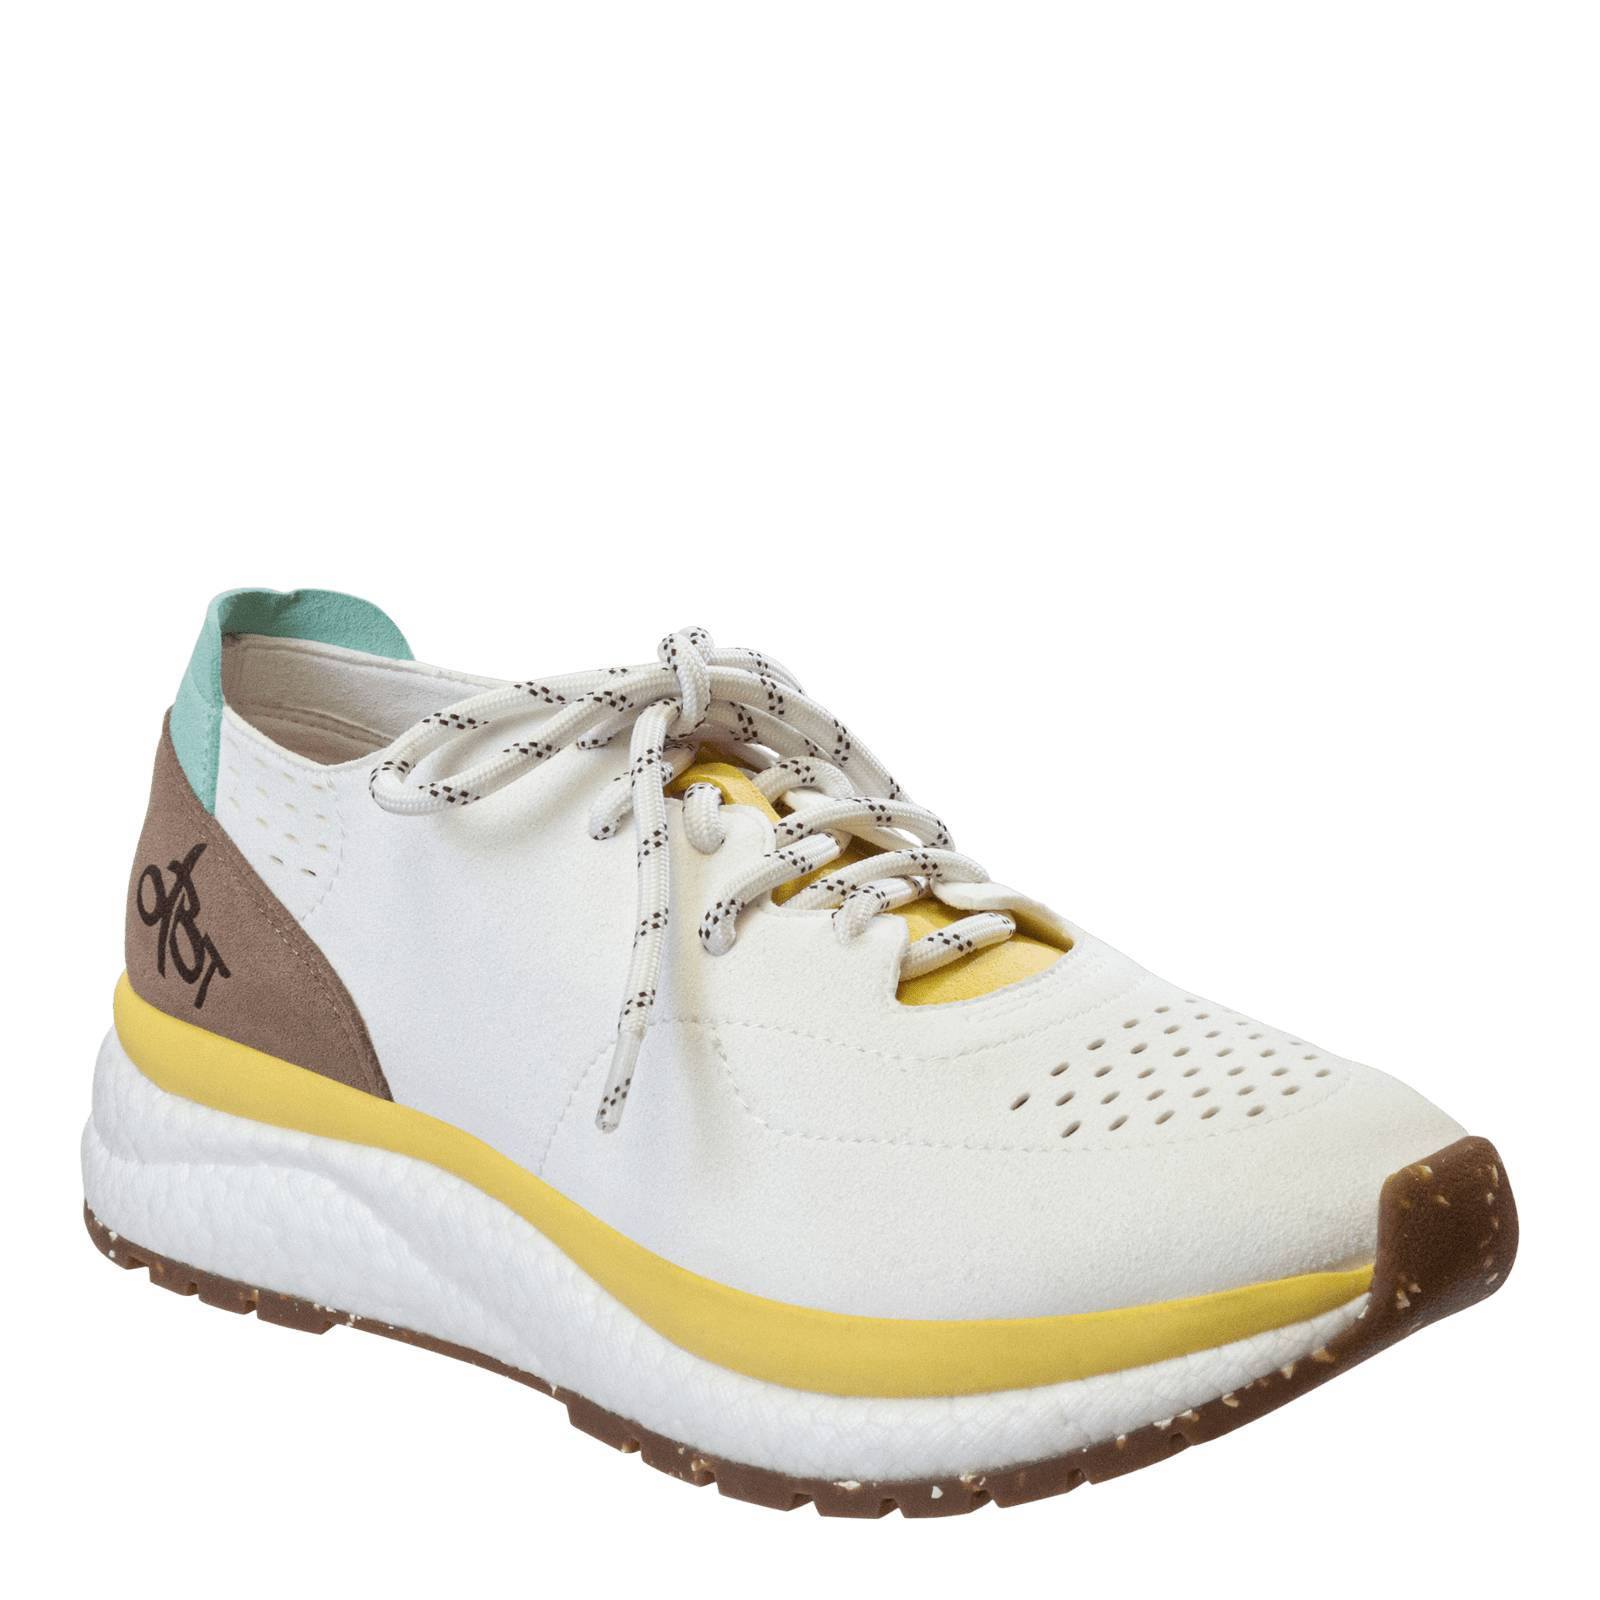 FREE in CANARY Sneakers